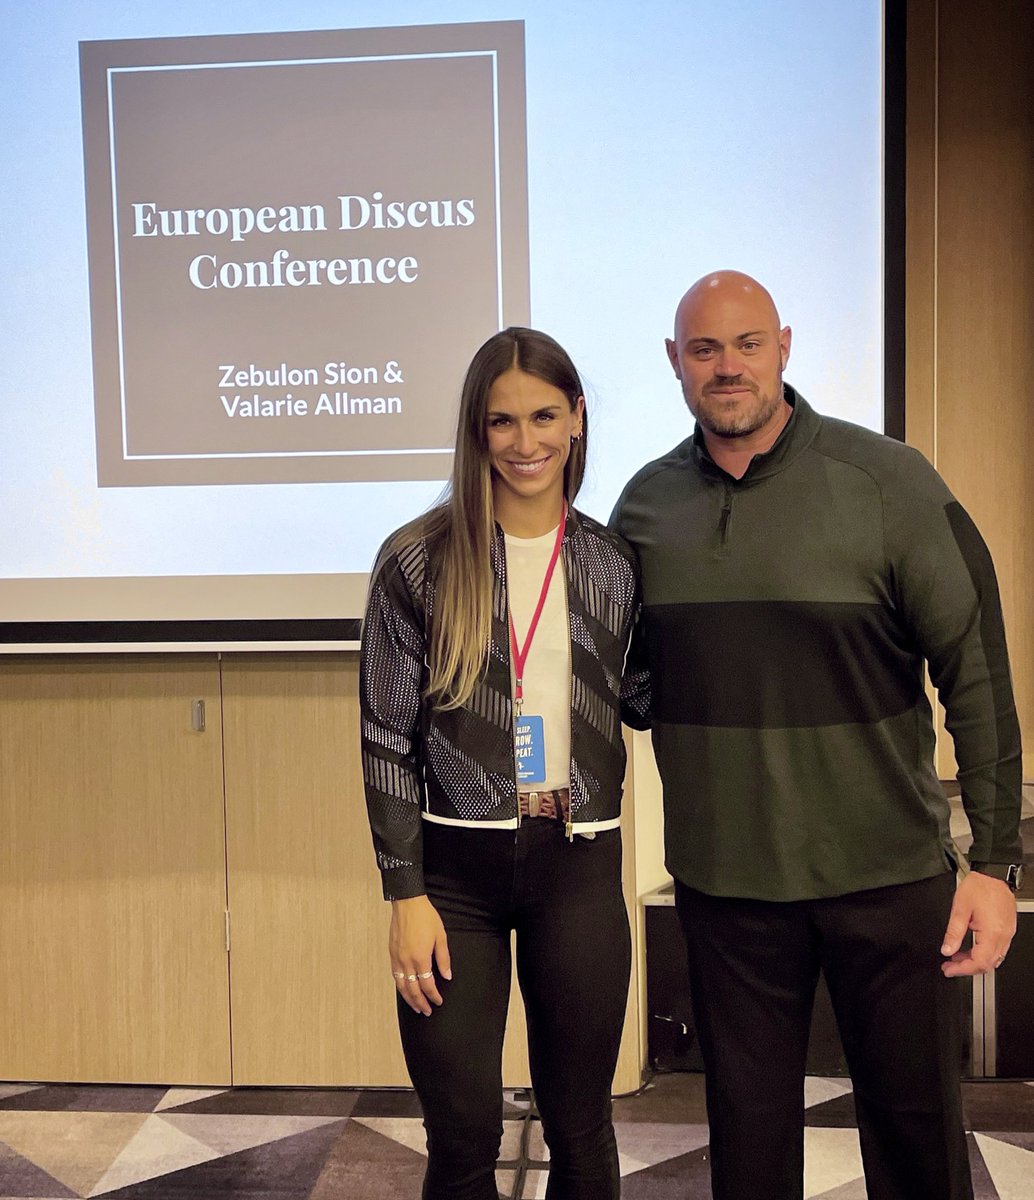 HUMBLED & HONORED 🙌🏼
@vallman123 & I spoke at the 2021 European Discus Conference in 🇪🇪 this past weekend about our system & her incredible 2021 season! It was an amazing experience. We spoke to 80+ people from 25+ countries including 🇸🇪,🇫🇷,🇷🇺,🇩🇪,🇳🇴,🇪🇸,🇮🇸,🇬🇧,🇨🇦, 🇲🇹
#ThrowsBySion